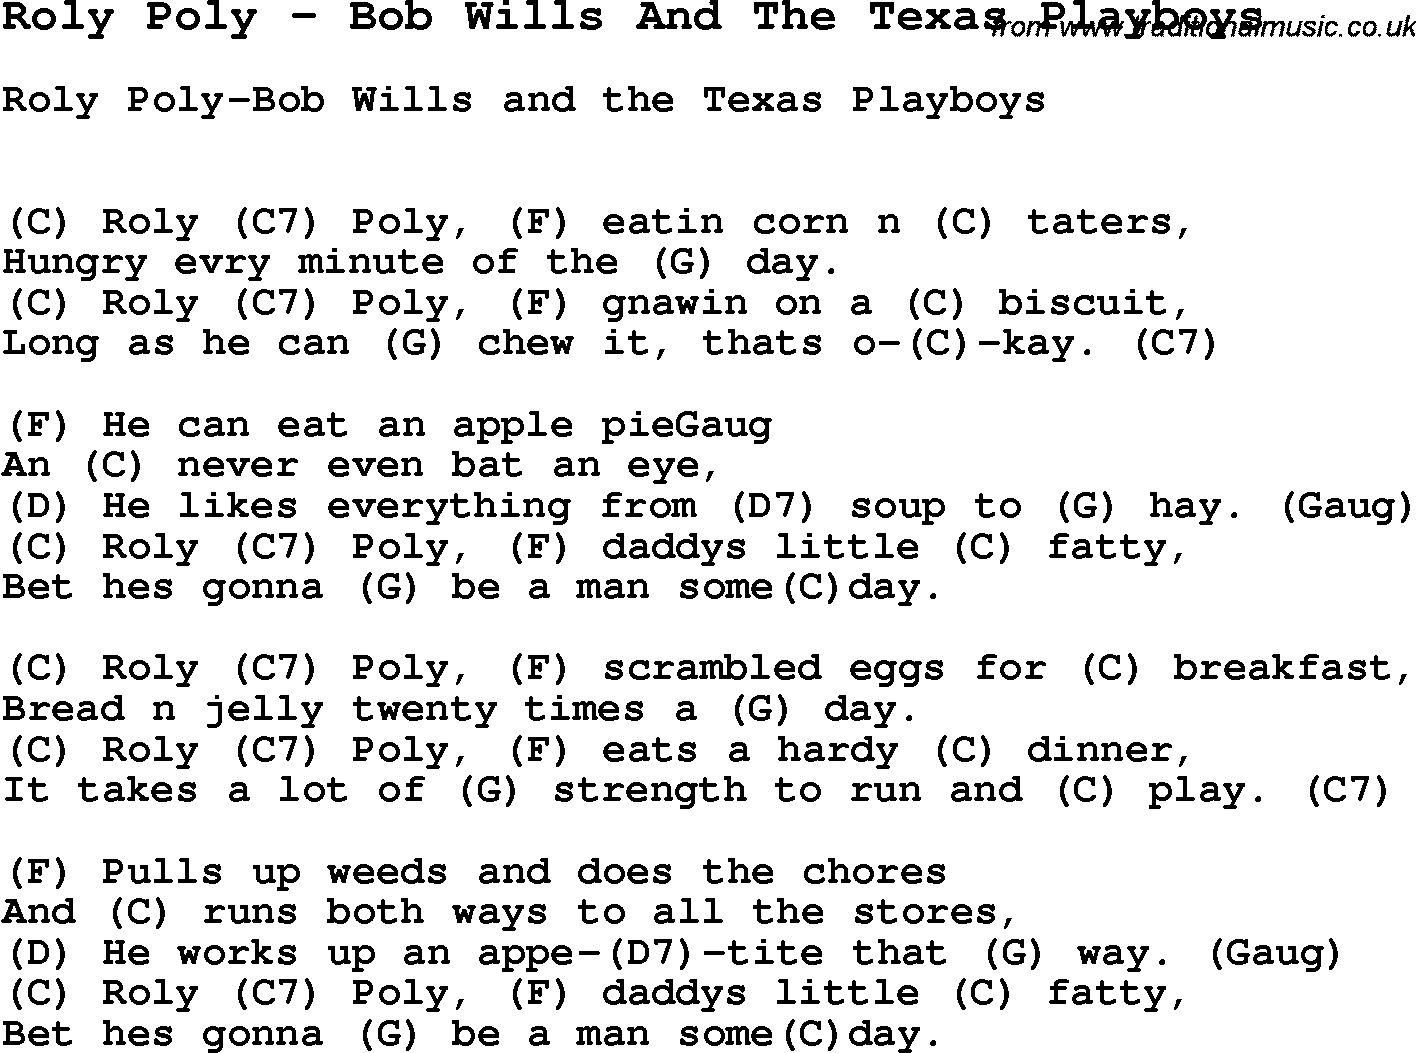 Song Roly Poly by Bob Wills And The Texas Playboys, with lyrics for vocal performance and accompaniment chords for Ukulele, Guitar Banjo etc.